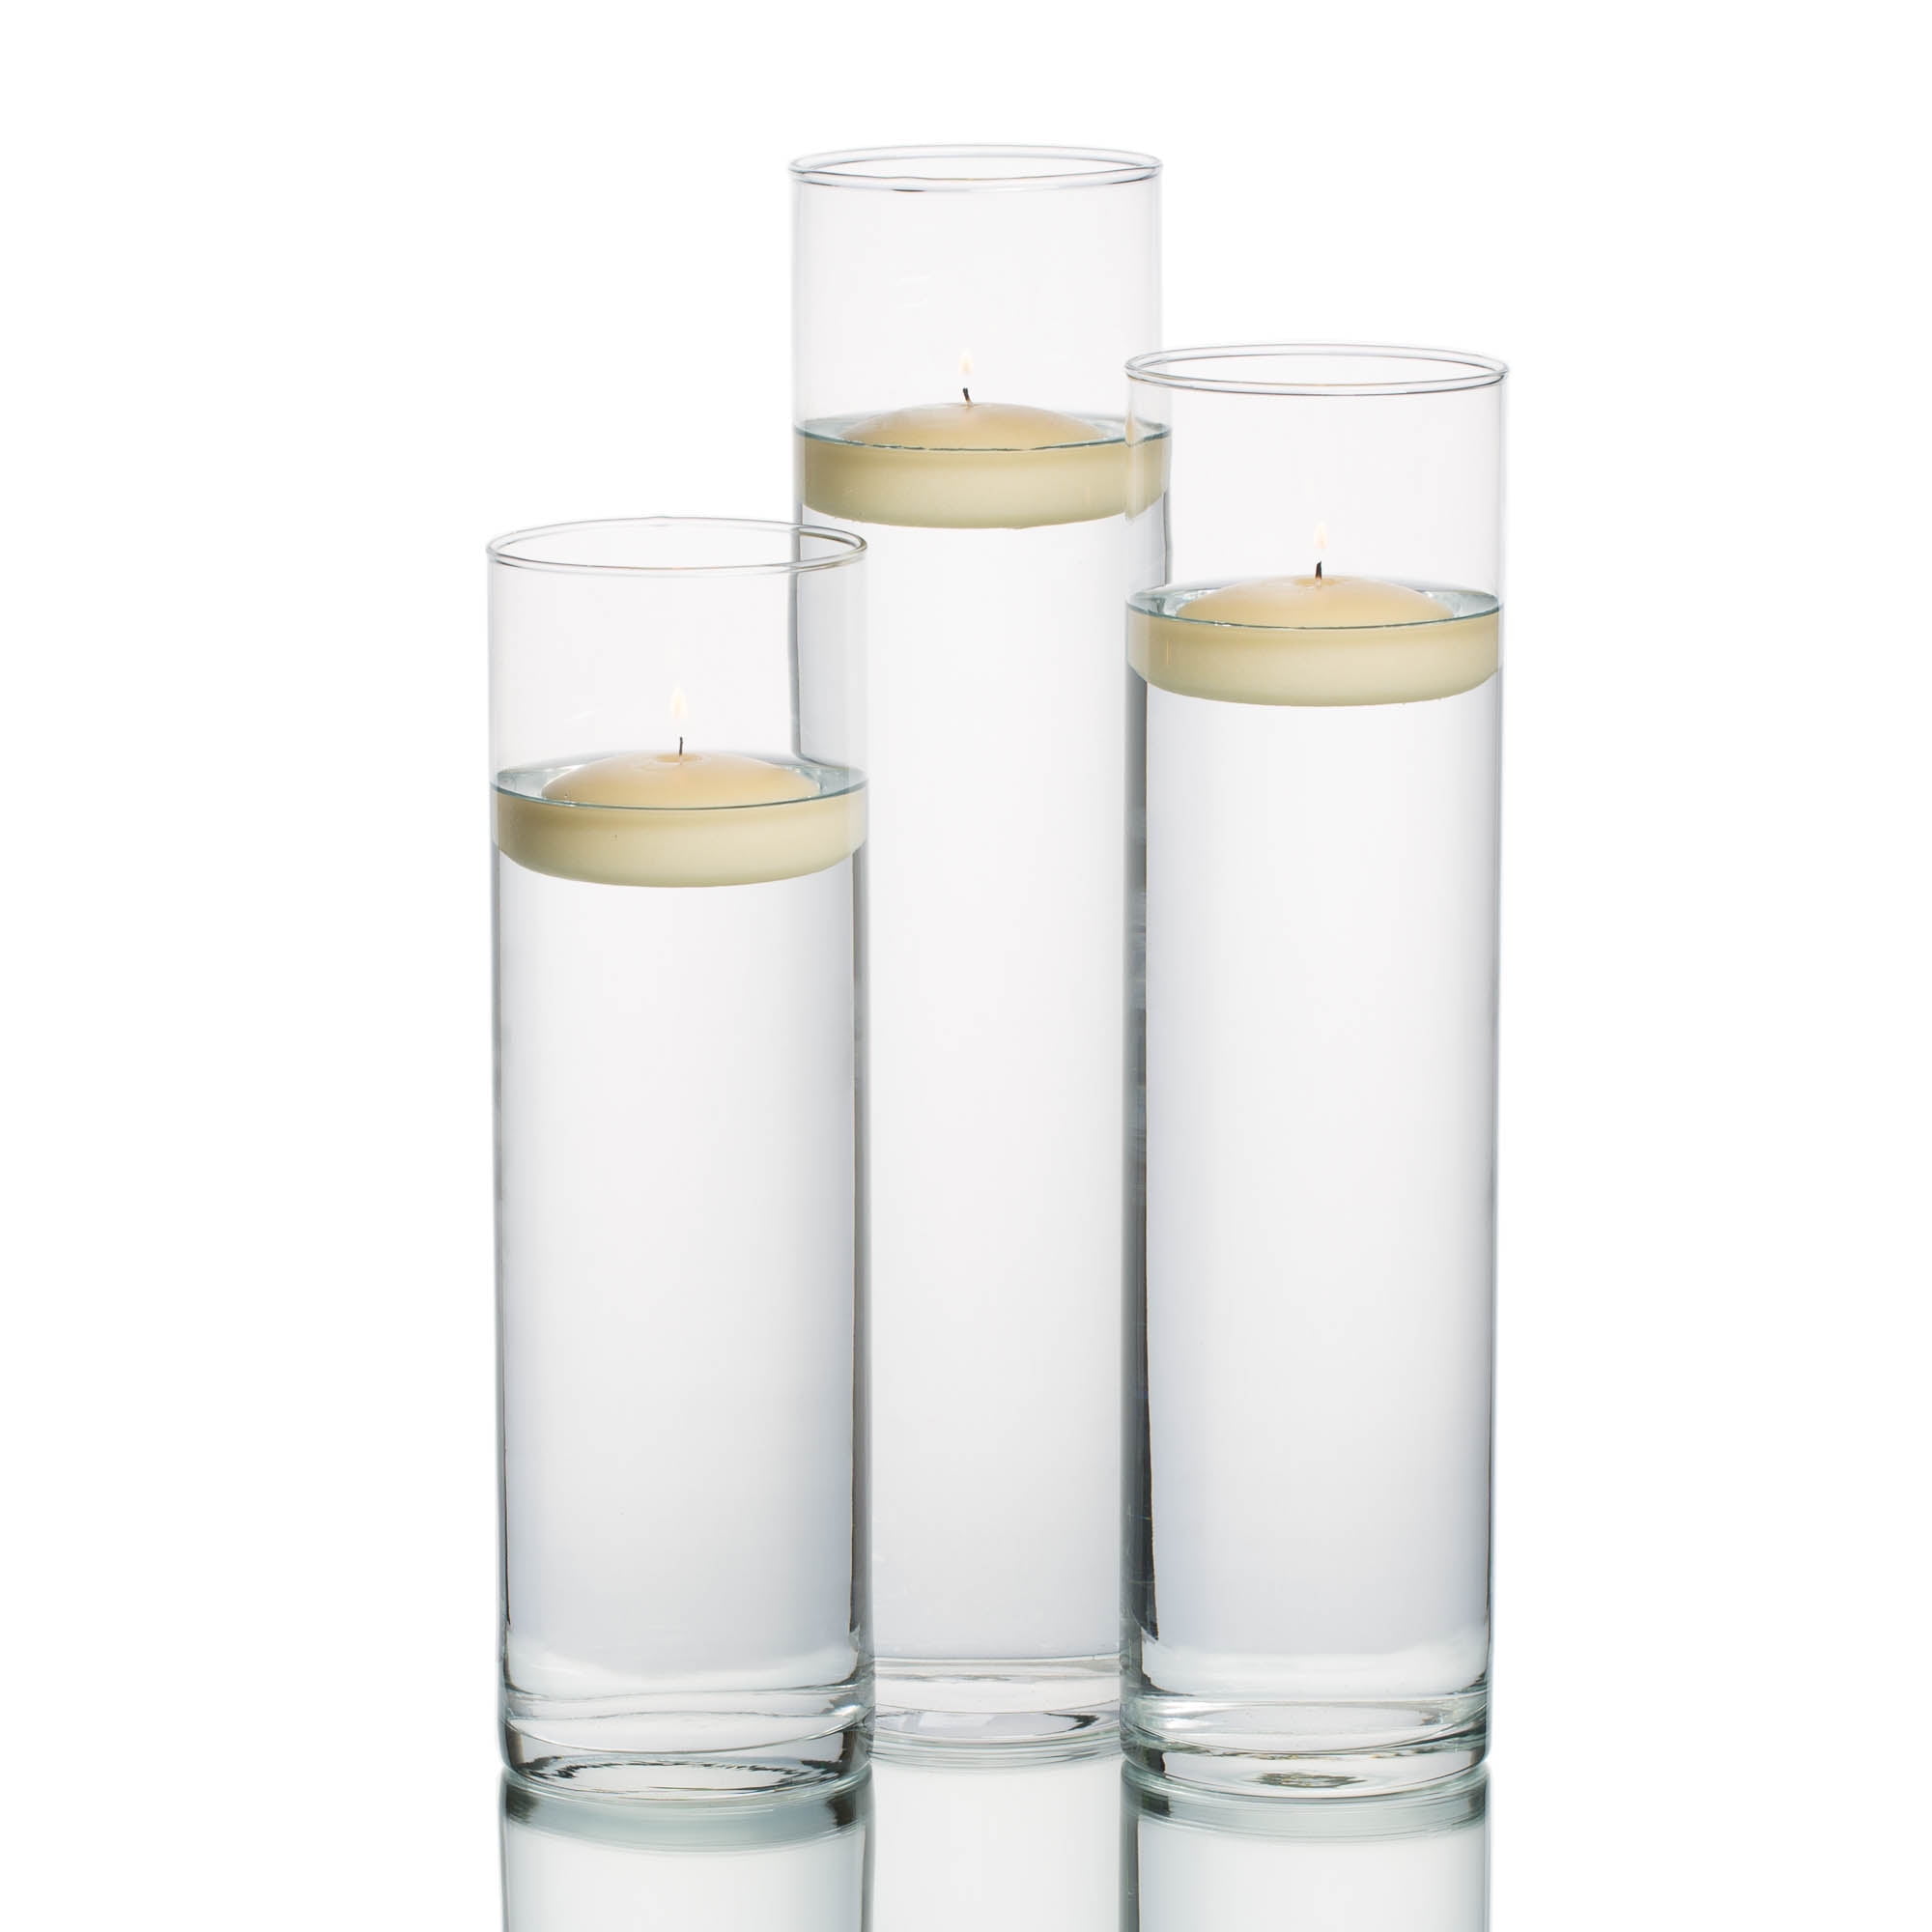 3SETS of 3Piece Cylinder Vases Wedding Glass Table Centerpiece Candle holders 